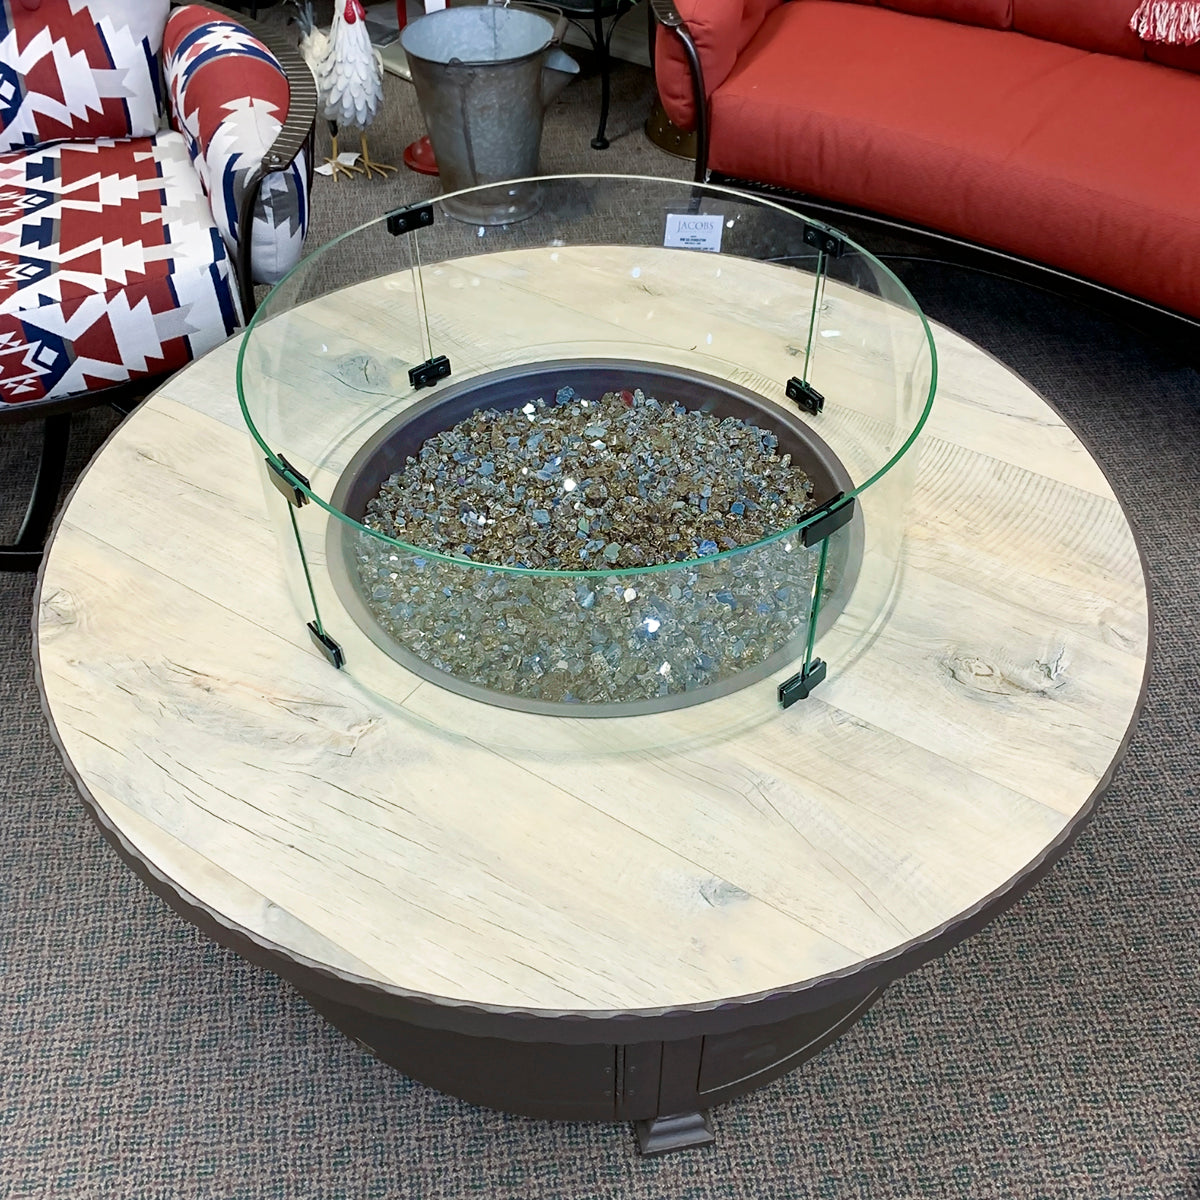 O.W. Lee Buckskin 42" Round Fire Pit W/Hammered Edge Santorini Rectangle Fire Pit is available at Jacobs Custom Living our Jacobs Custom Living Spokane Valley showroom.